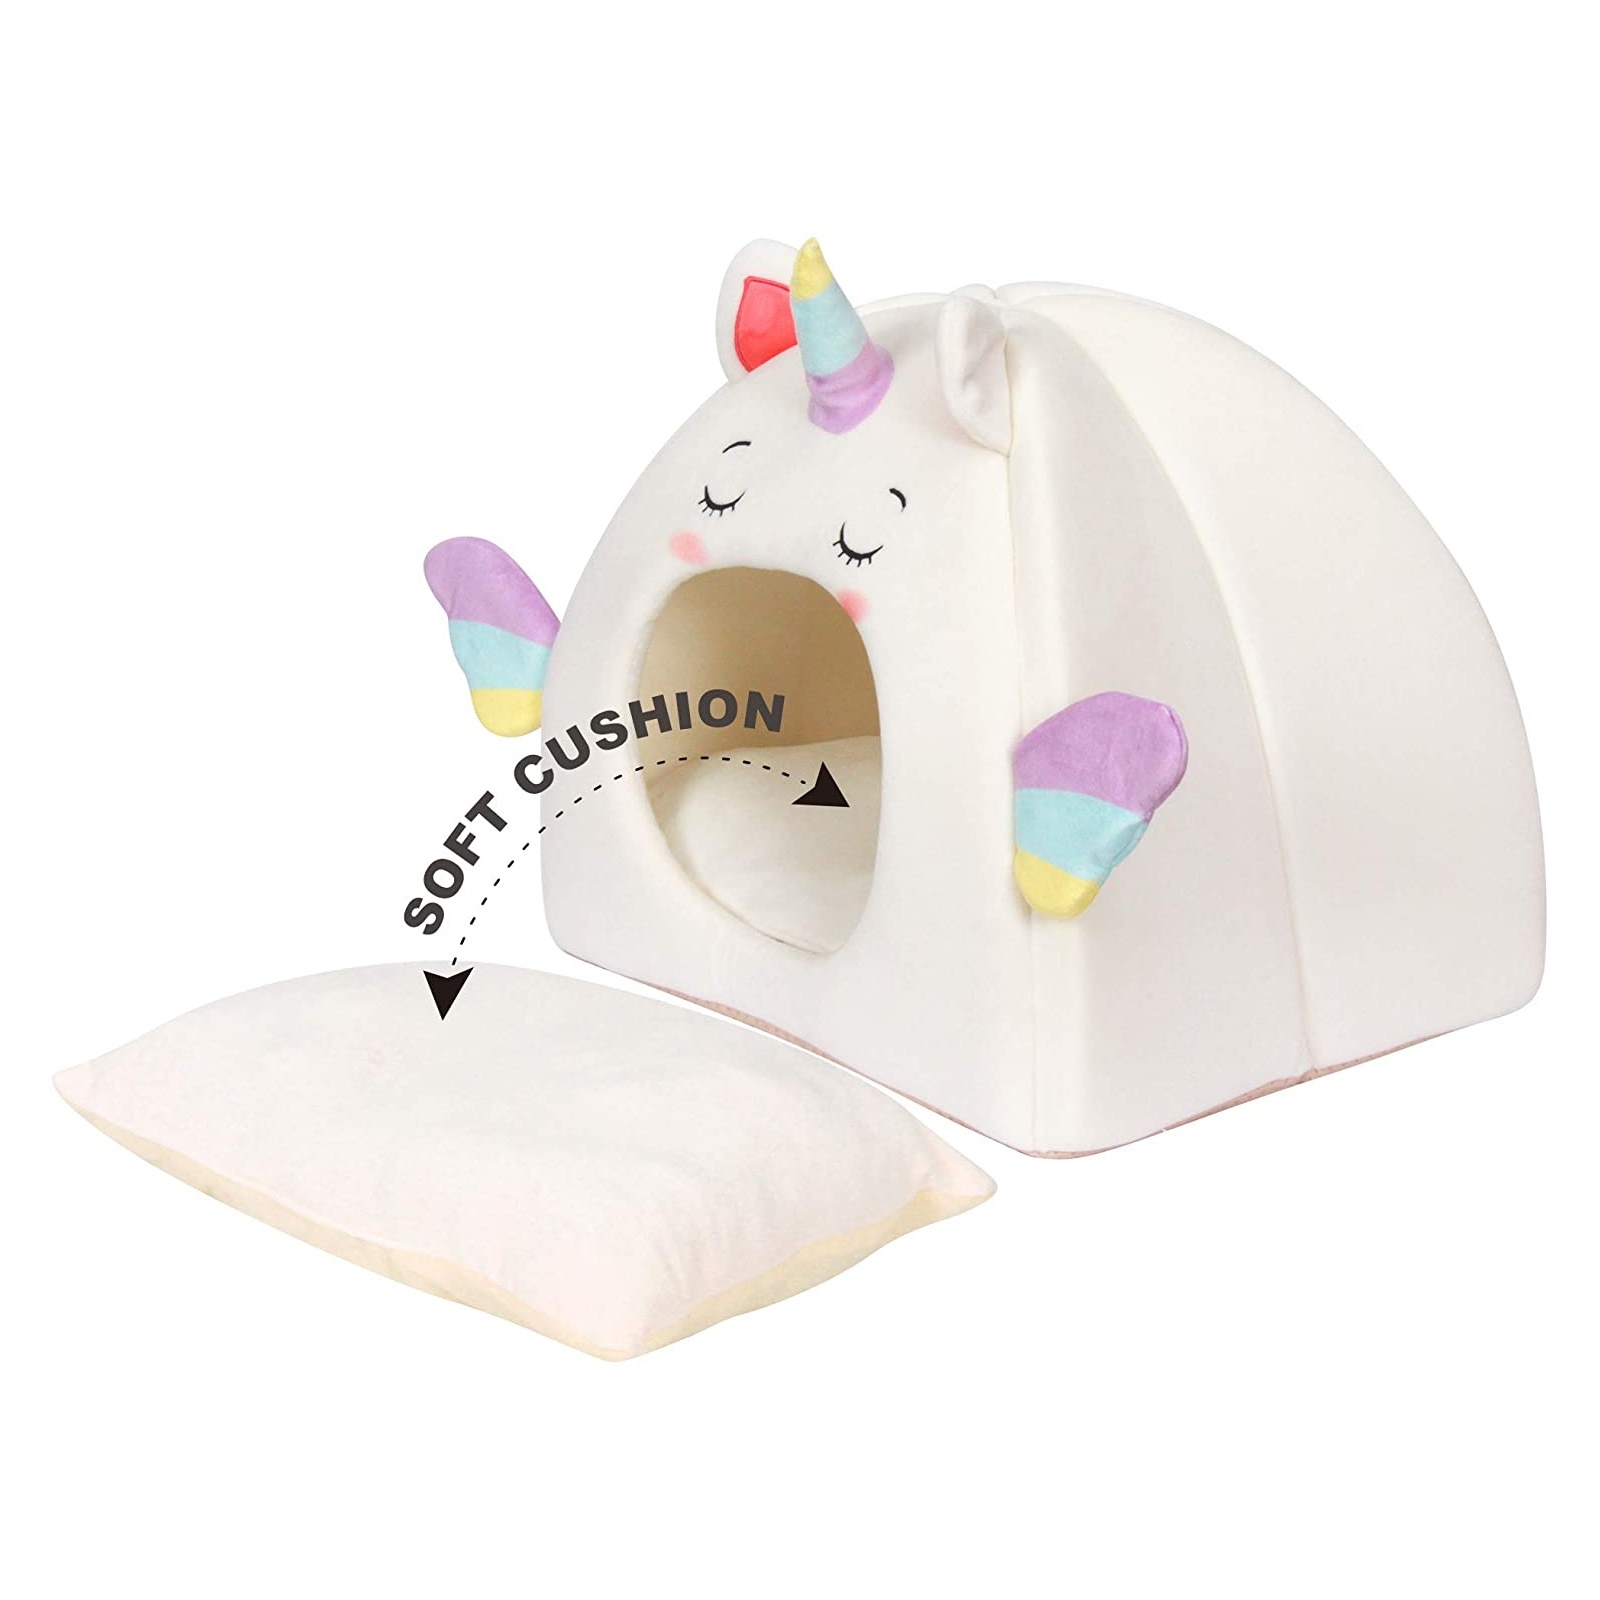 All Fur You Soft and Comfortable Unicorn Cat Cave Bed in White image 0